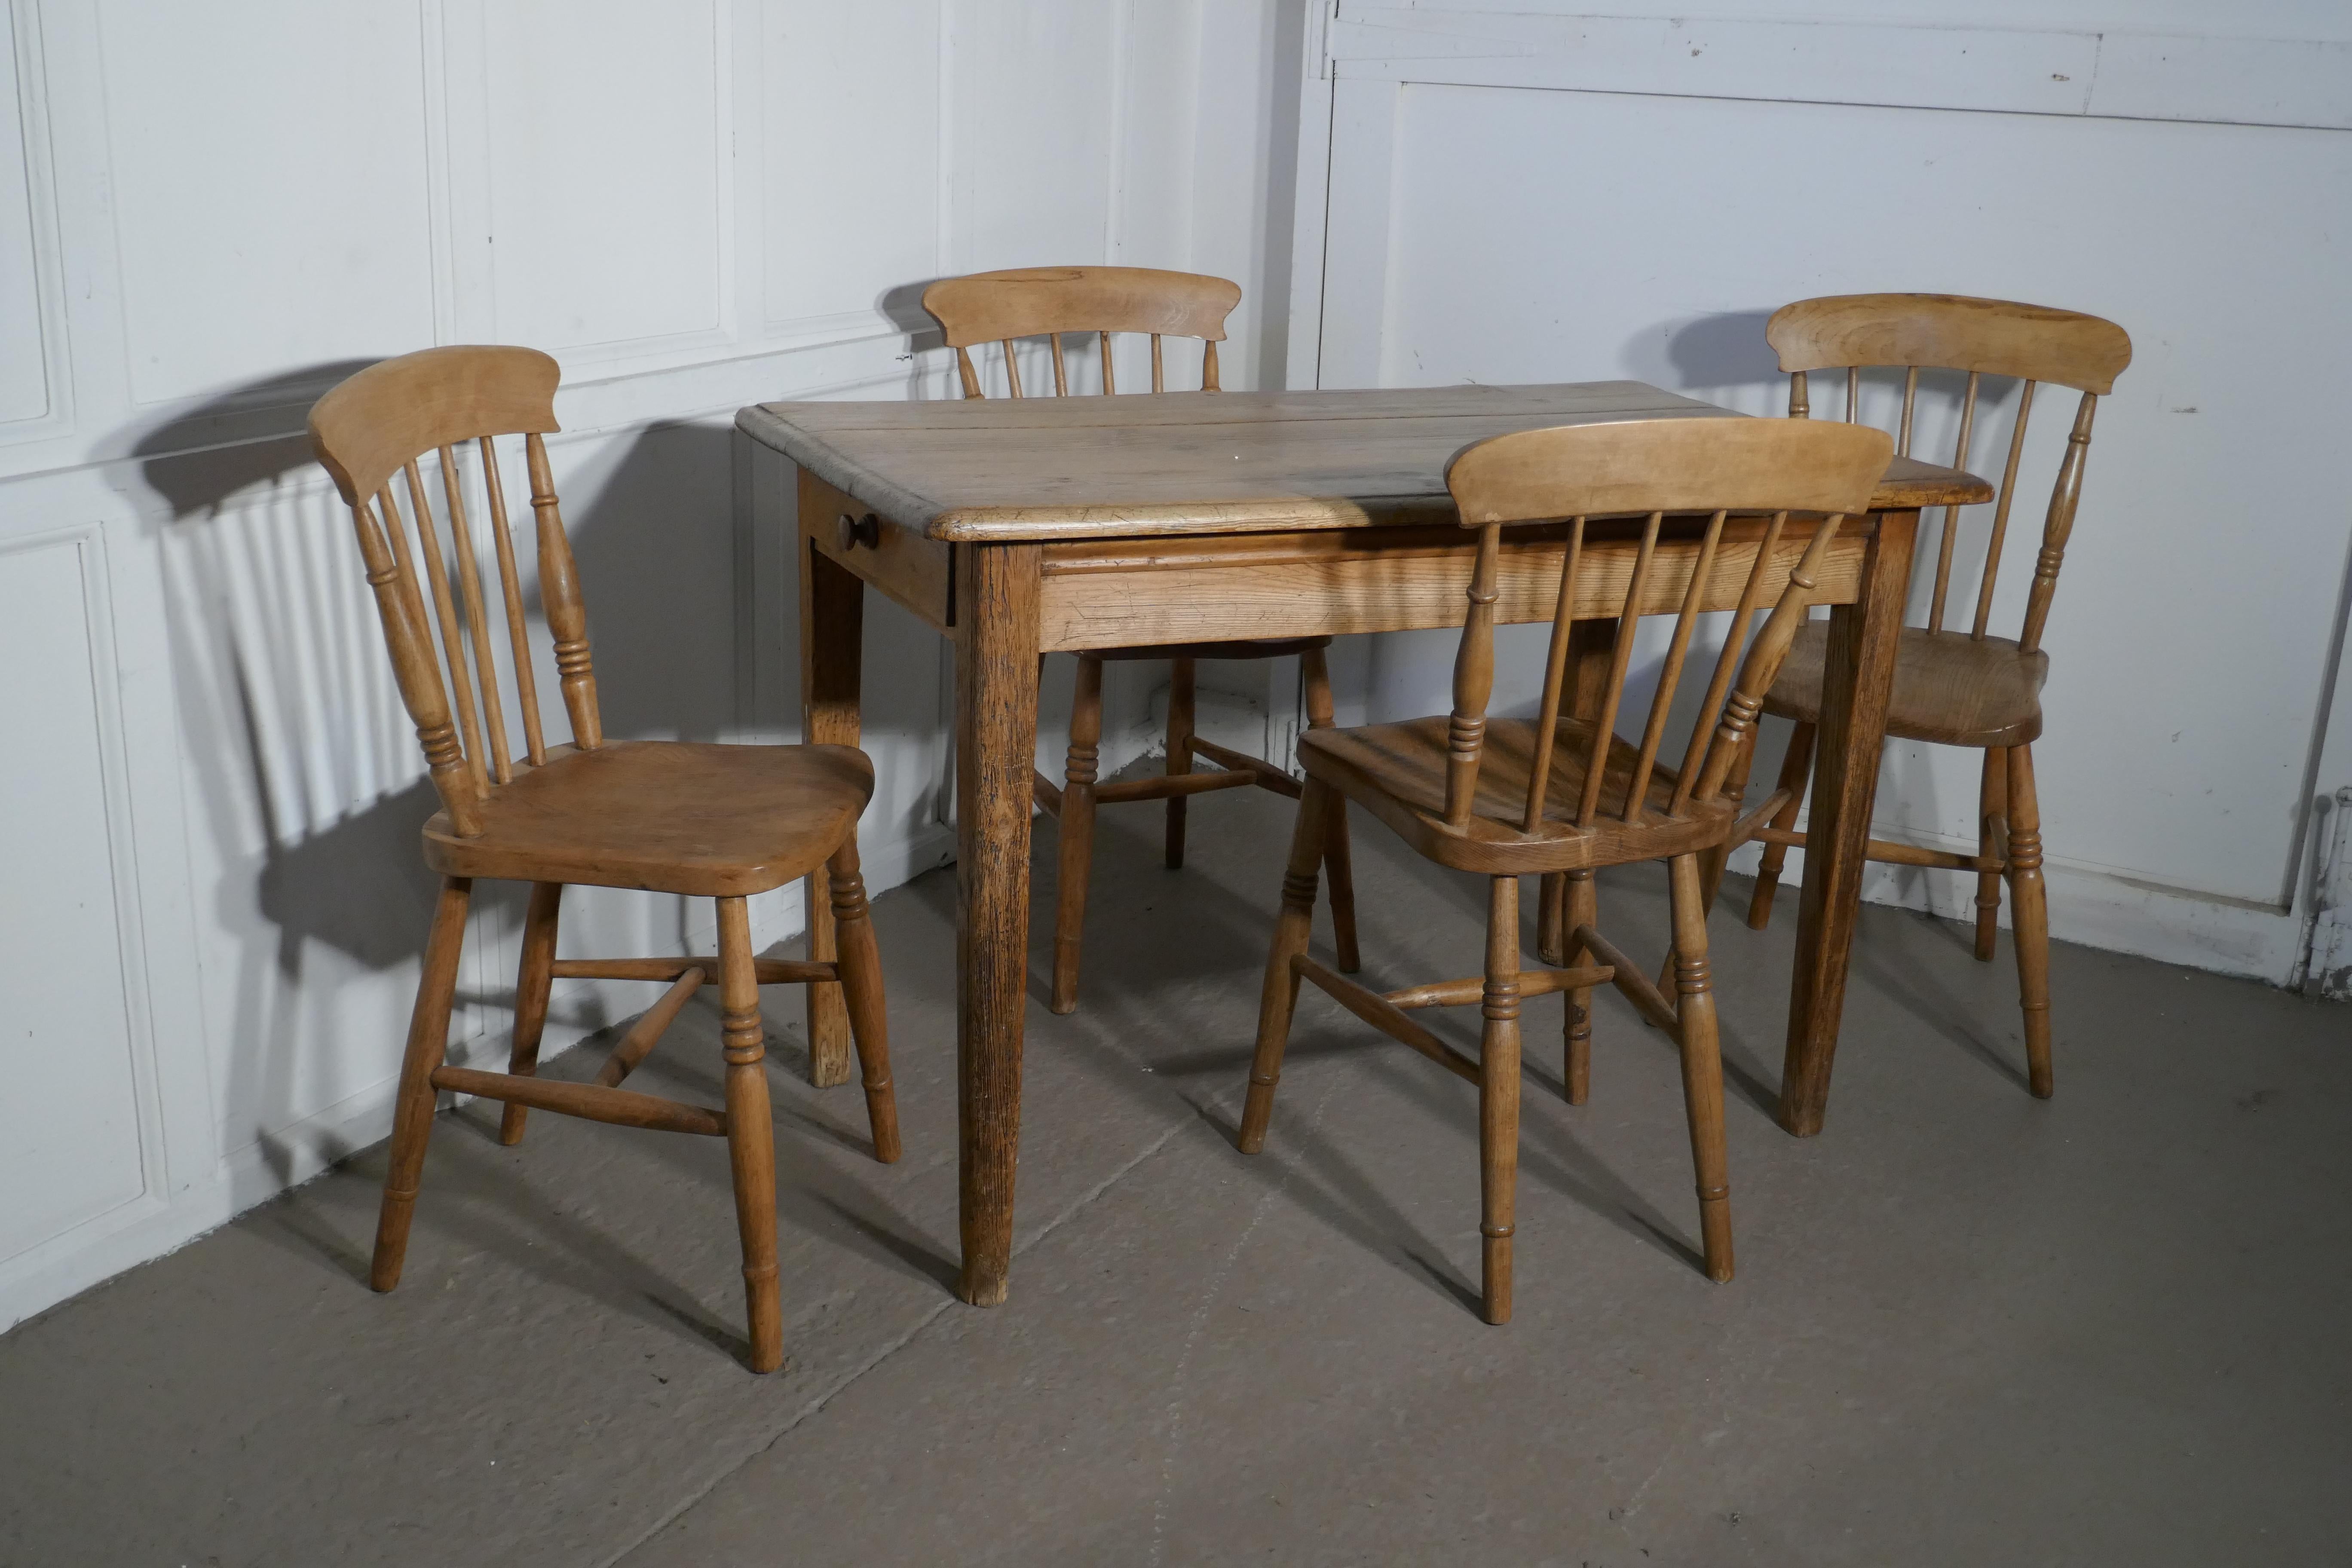 19th Century Harlequin Set of 4 Victorian Beech & Elm Country Kitchen Chairs